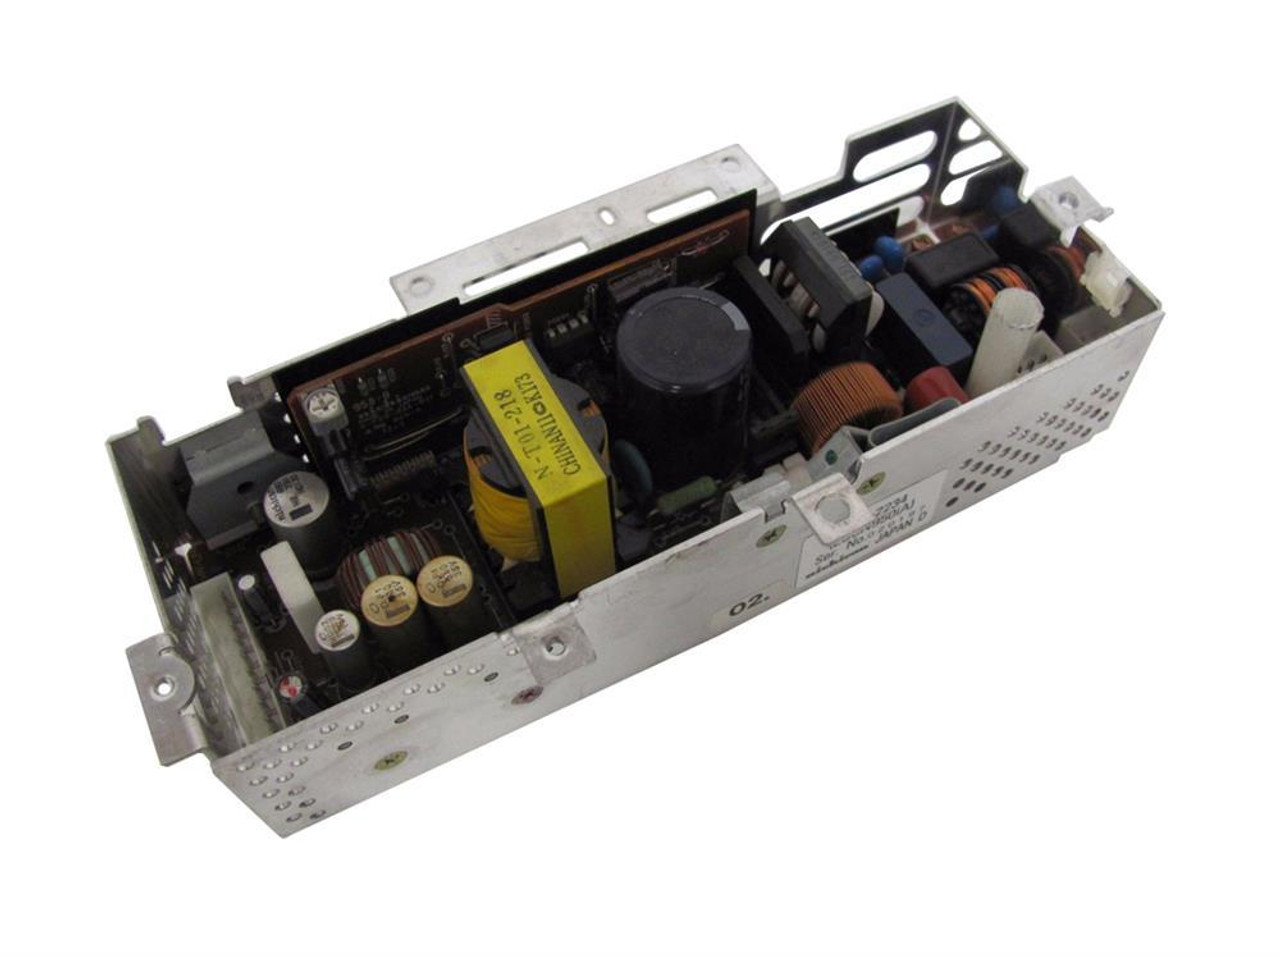 RH3-2234 HP Power Supply with Veristor Cover for LaserJet 4100 Series Multifunction Printer (MFP)